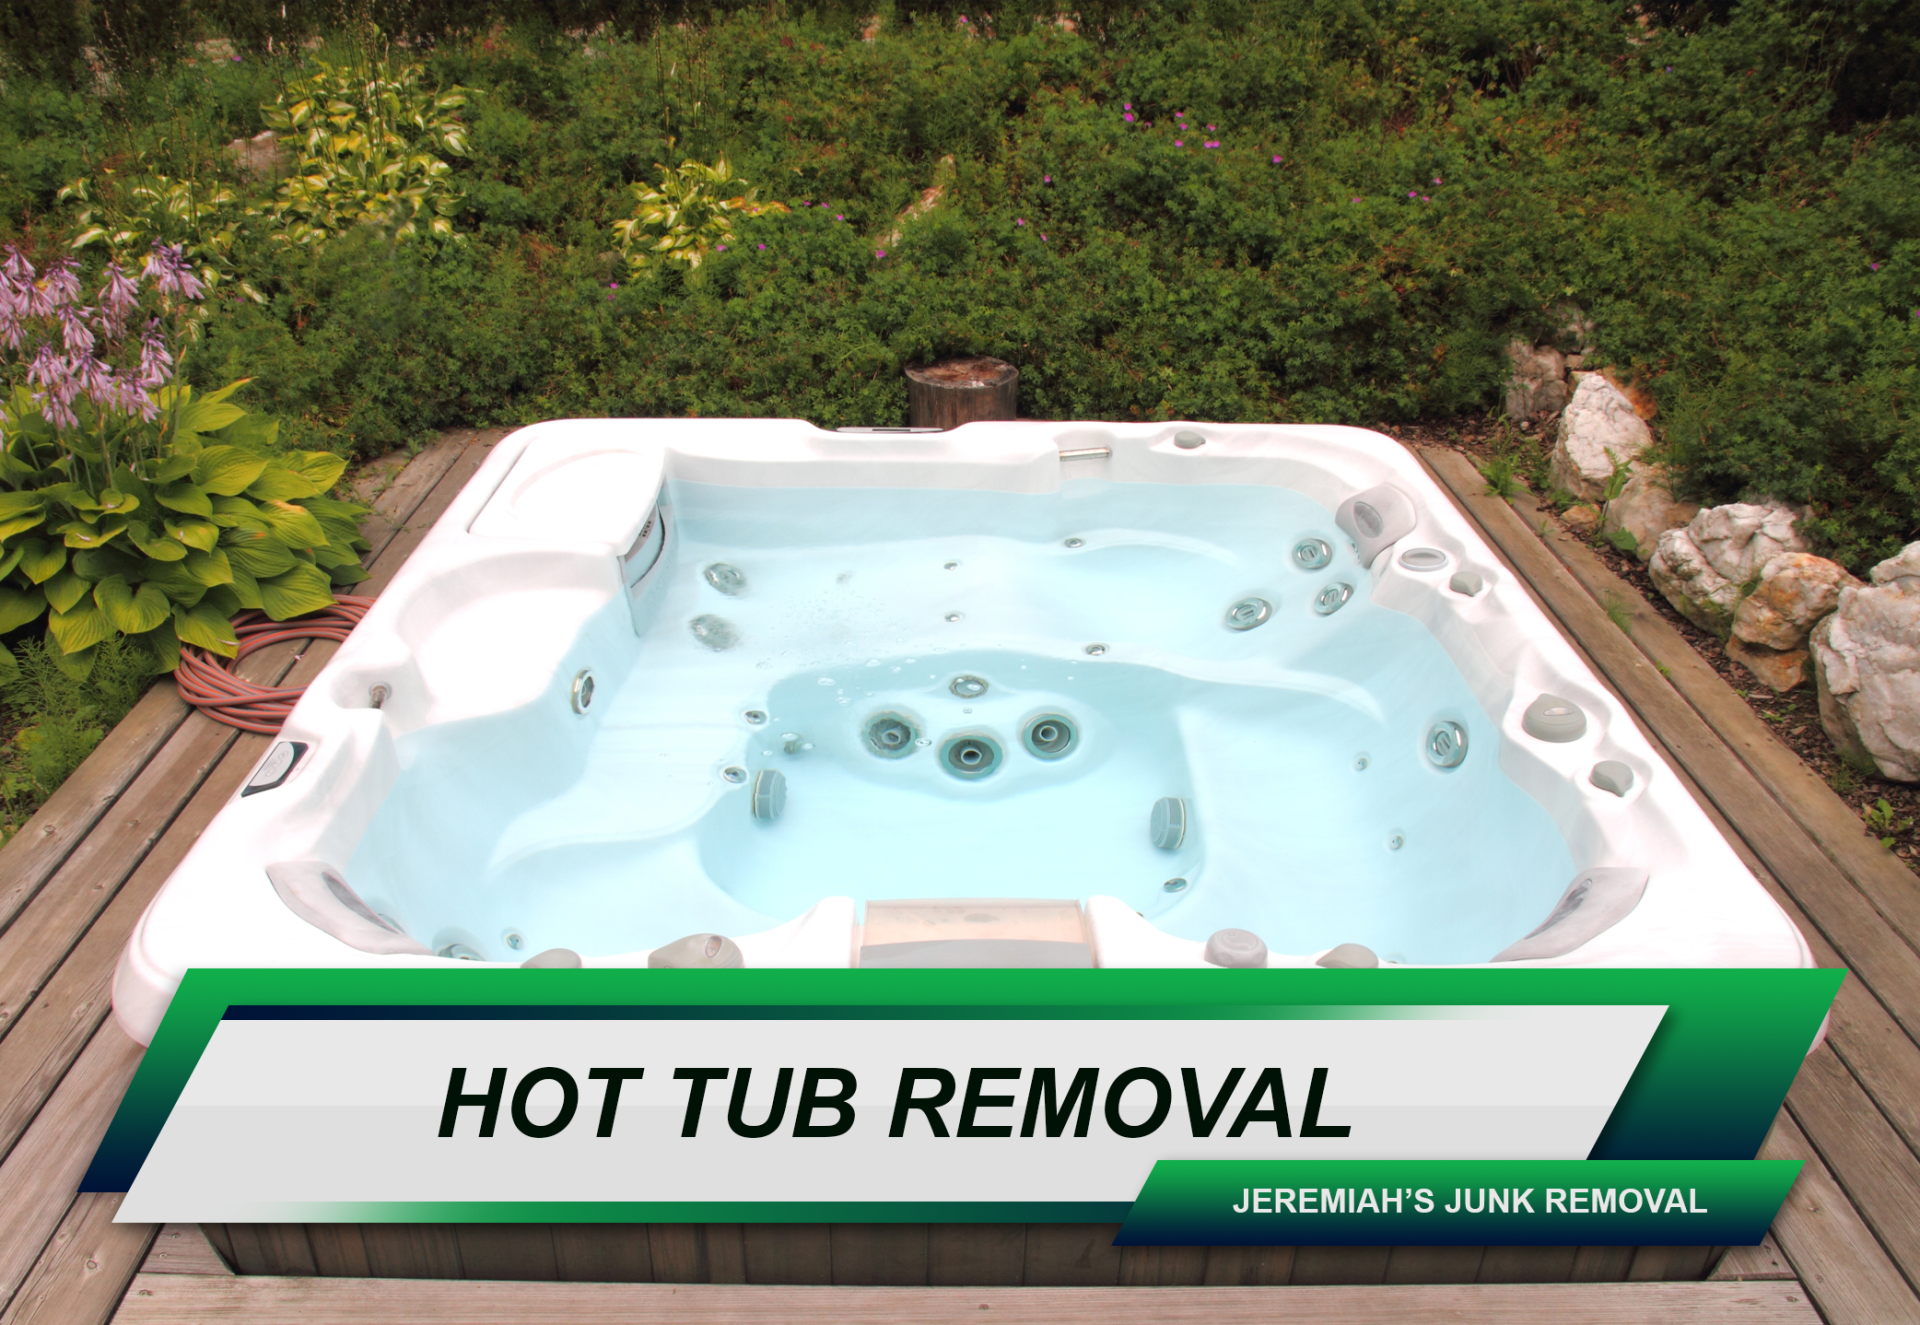 Ho tub removal services